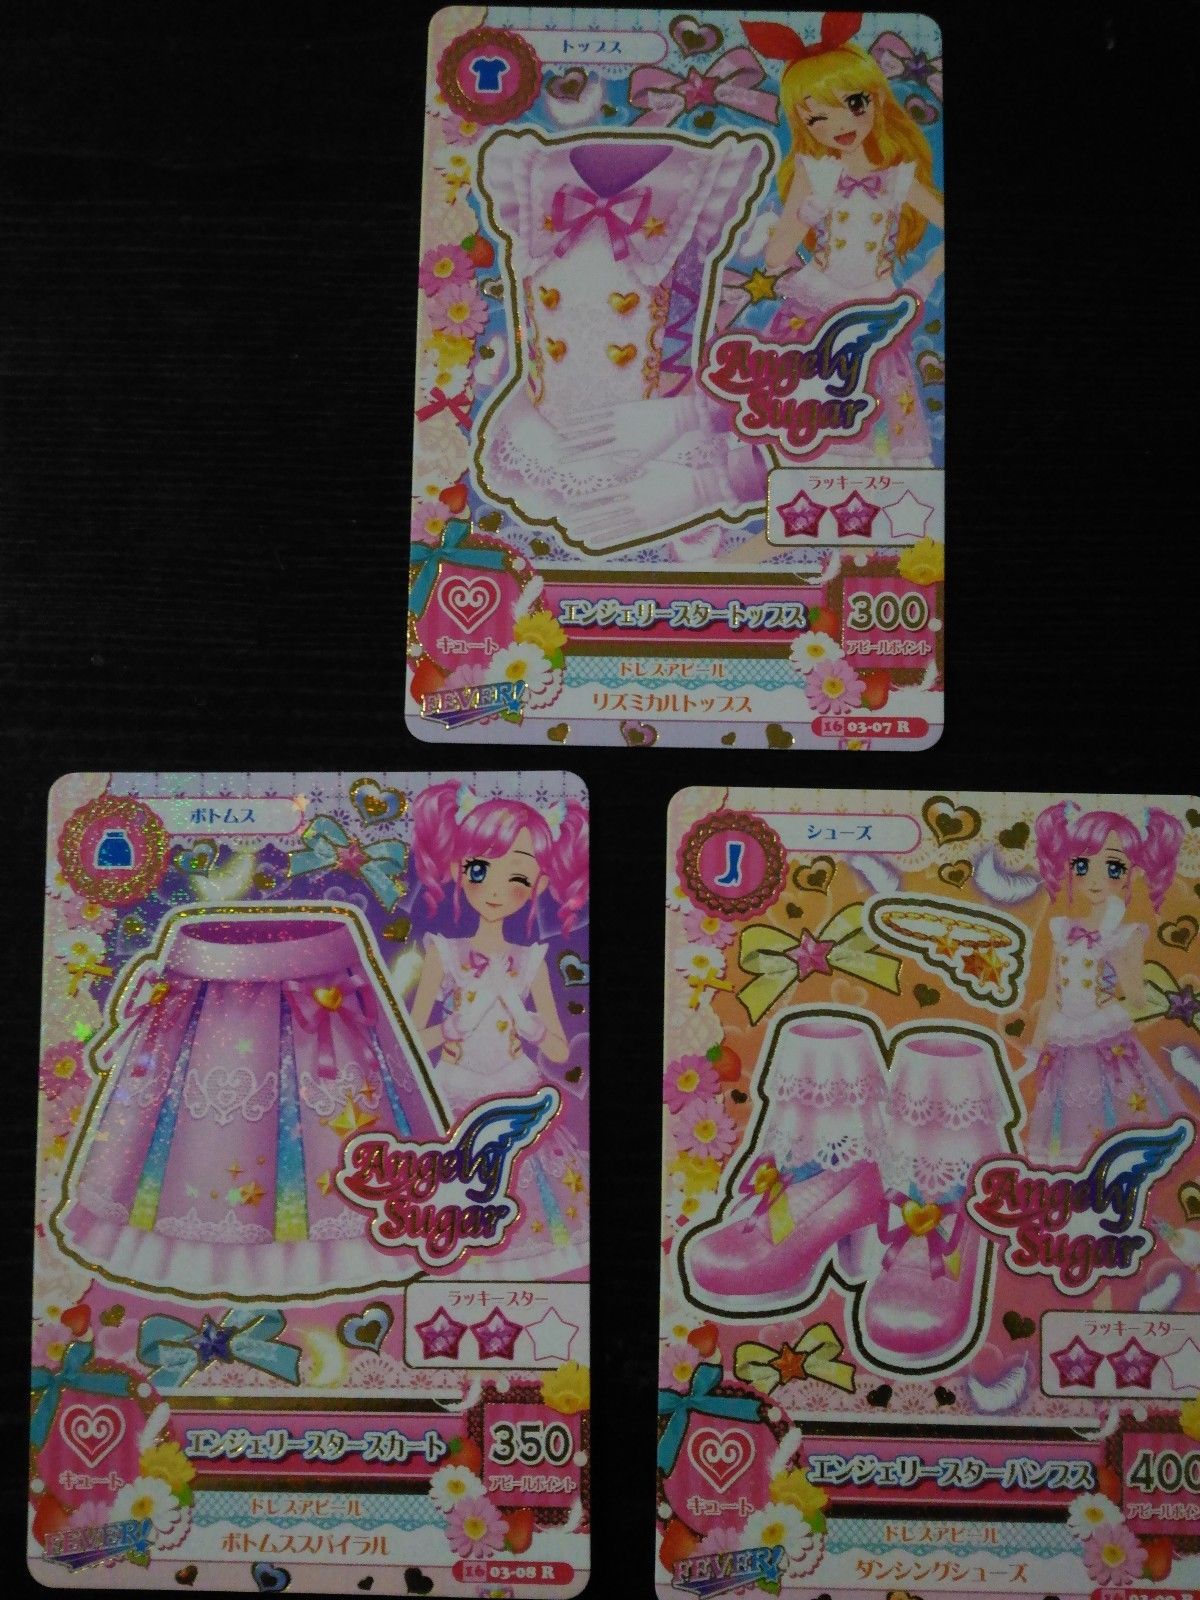 Trading card of Japanese Animation "AIKATSU" Angely star rare coord (2016 3rd)